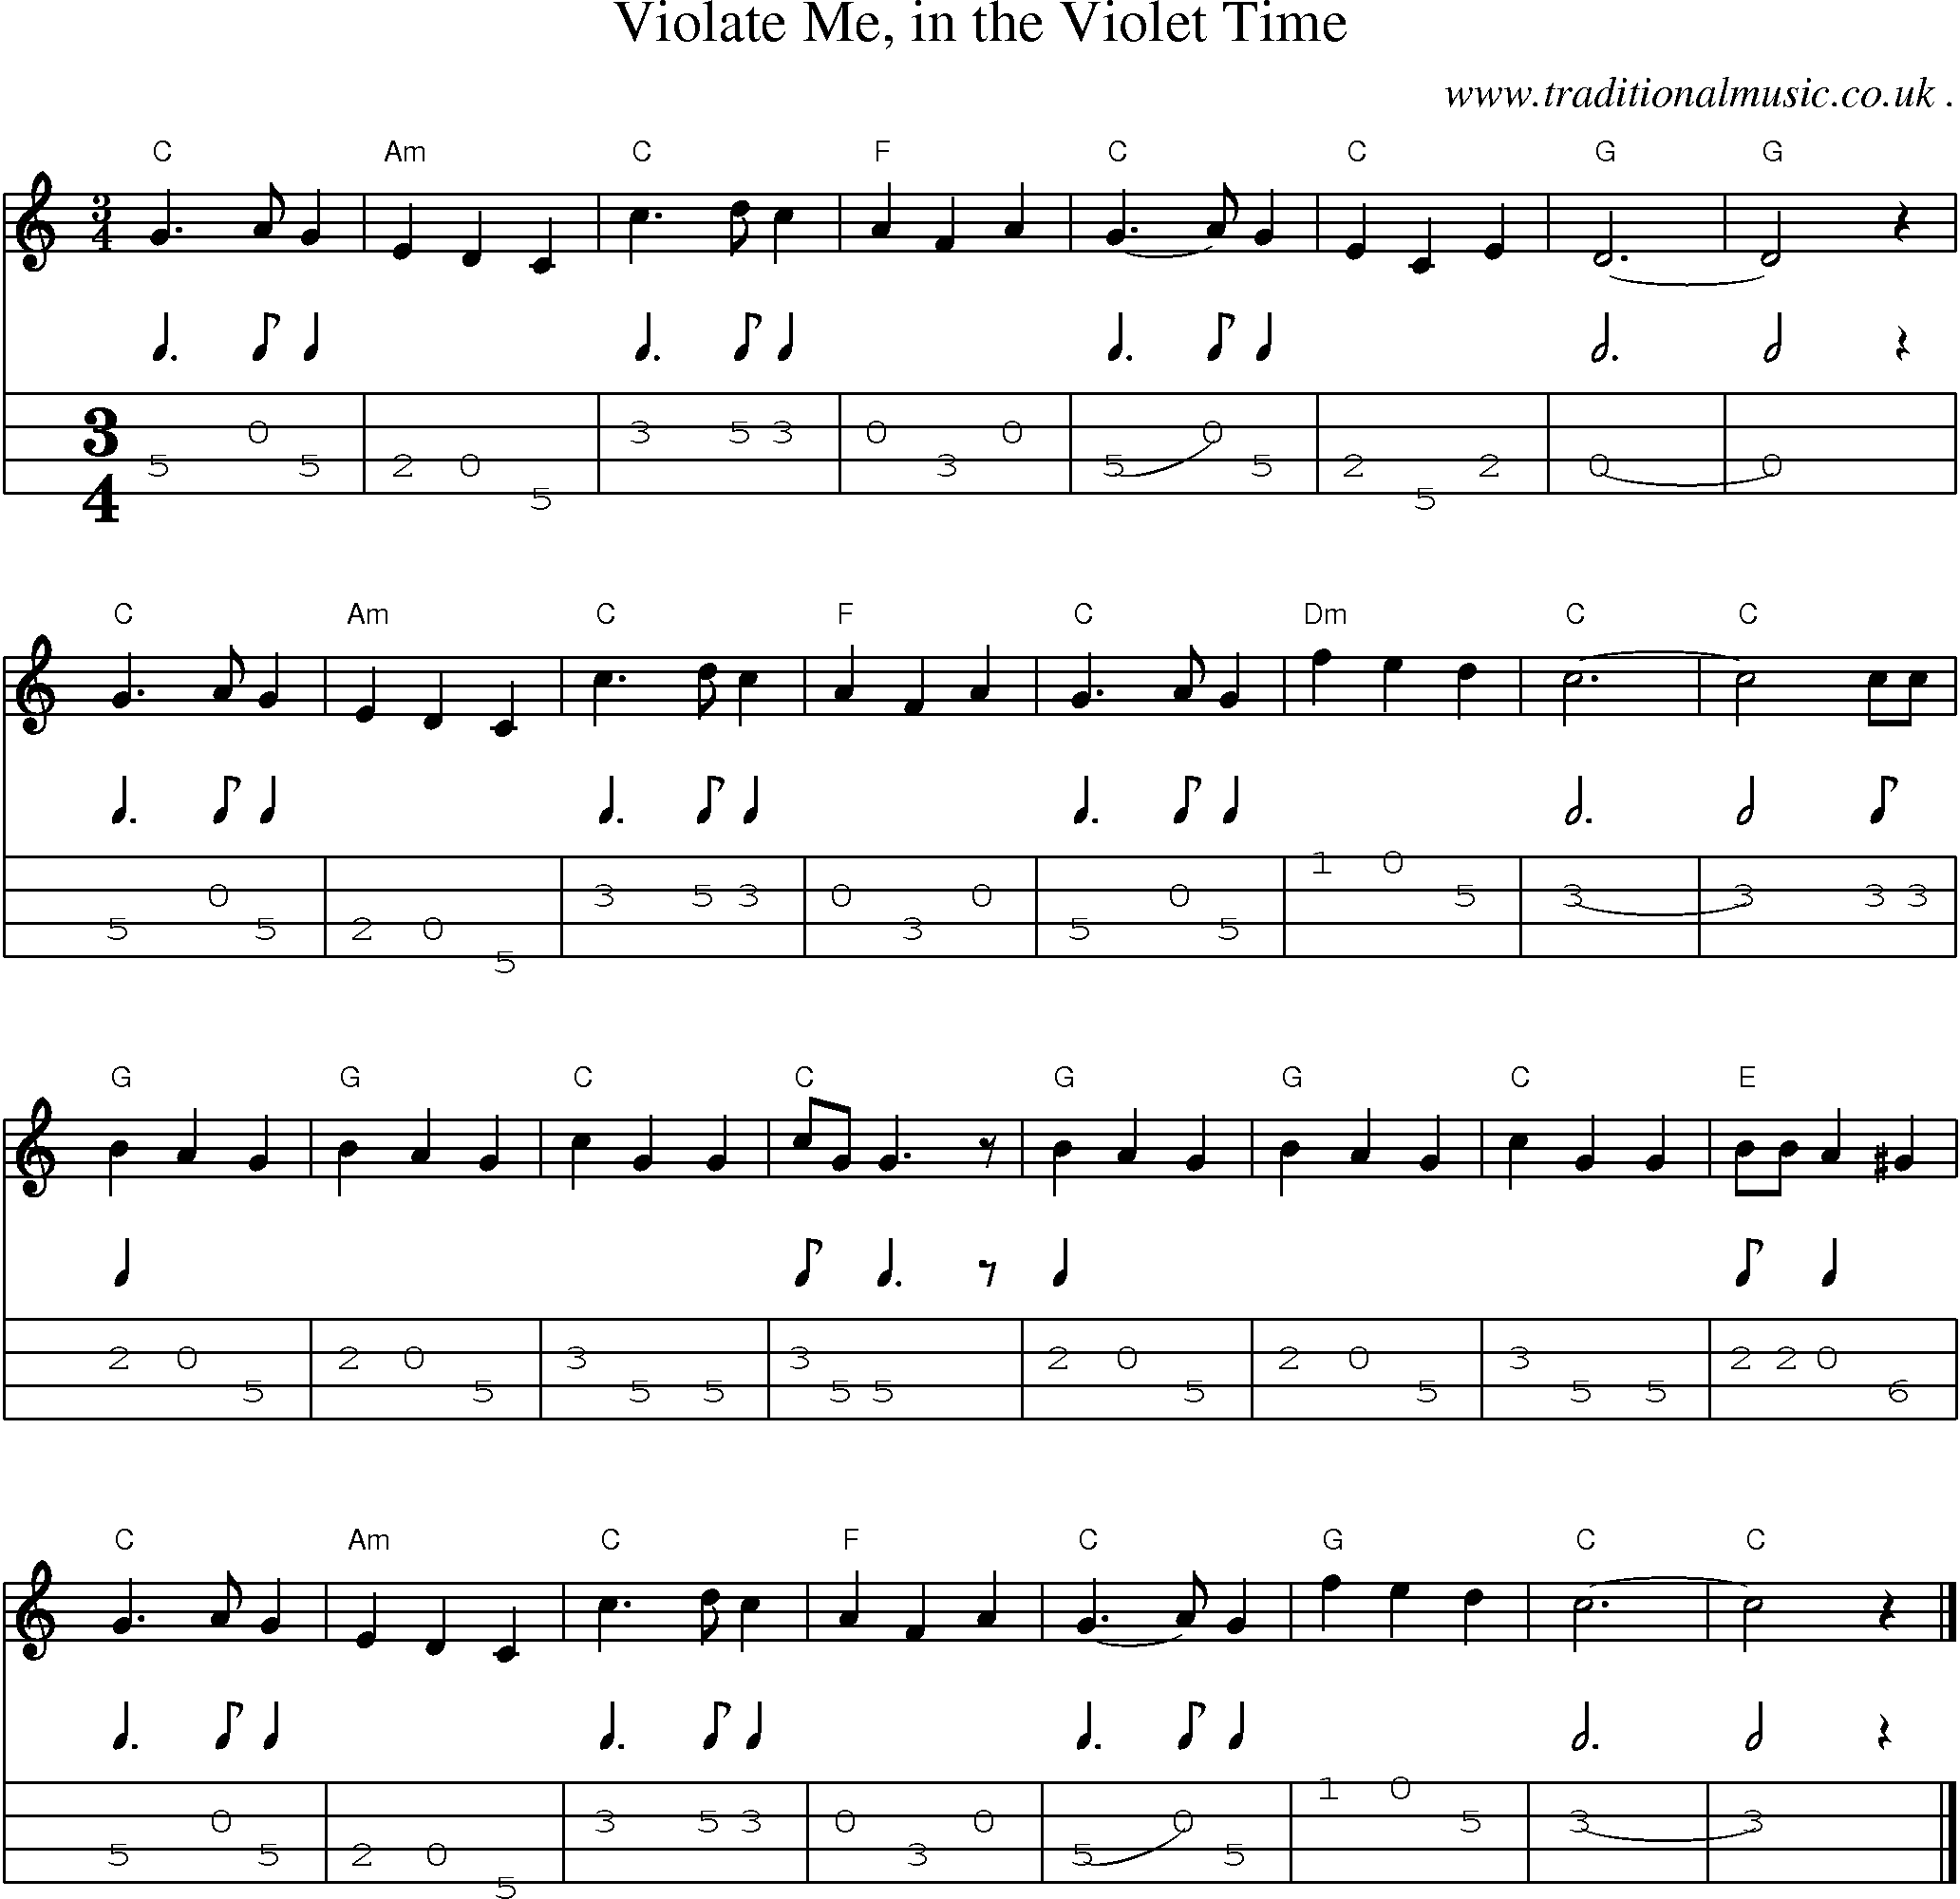 Music Score and Guitar Tabs for Violate Me in the Violet Time